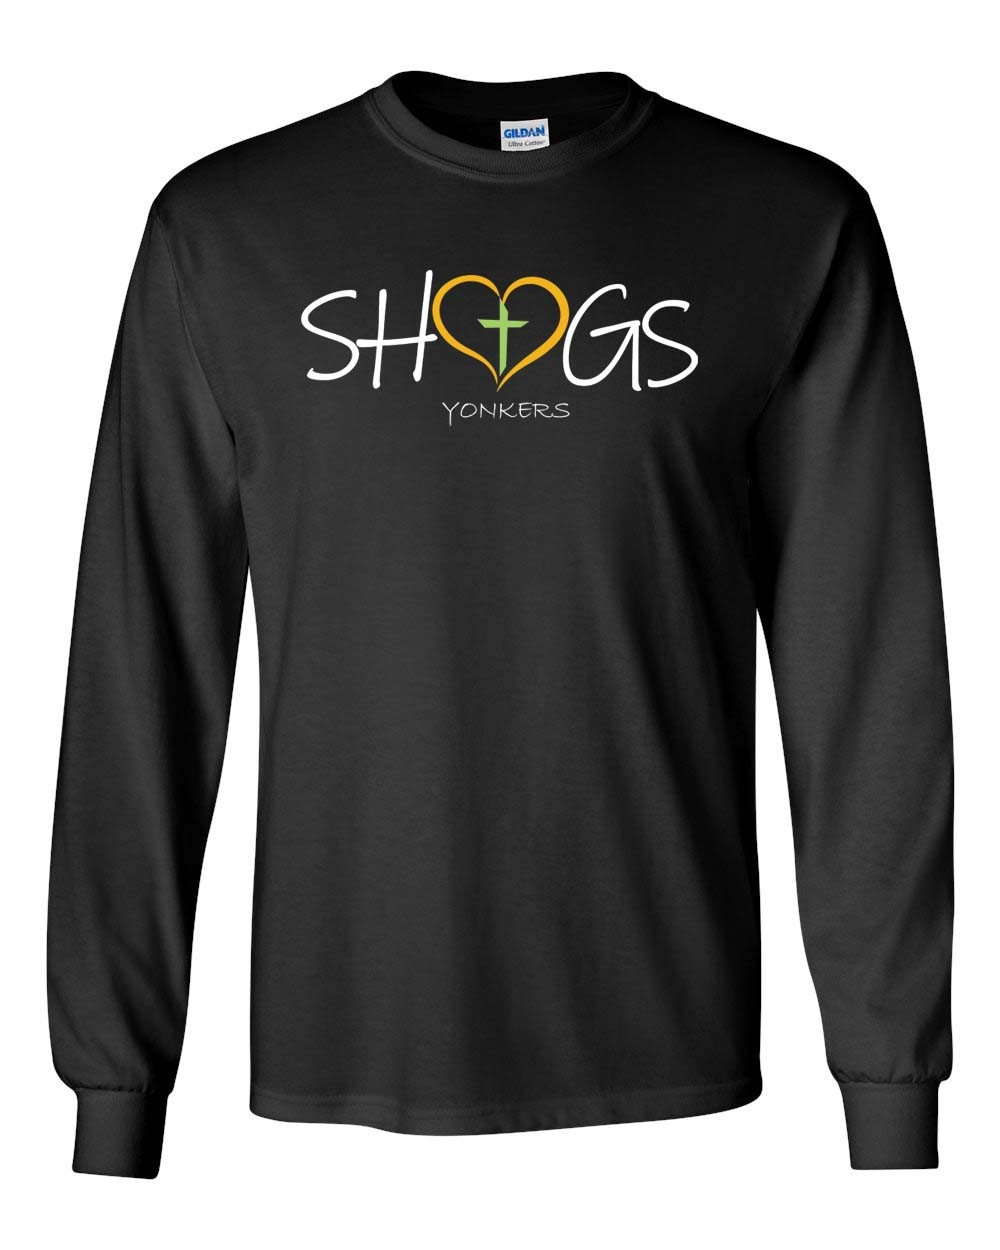 SHGS Spirit L/S T-Shirt w/ Heart Logo - Please Allow 2-3 Weeks for Delivery